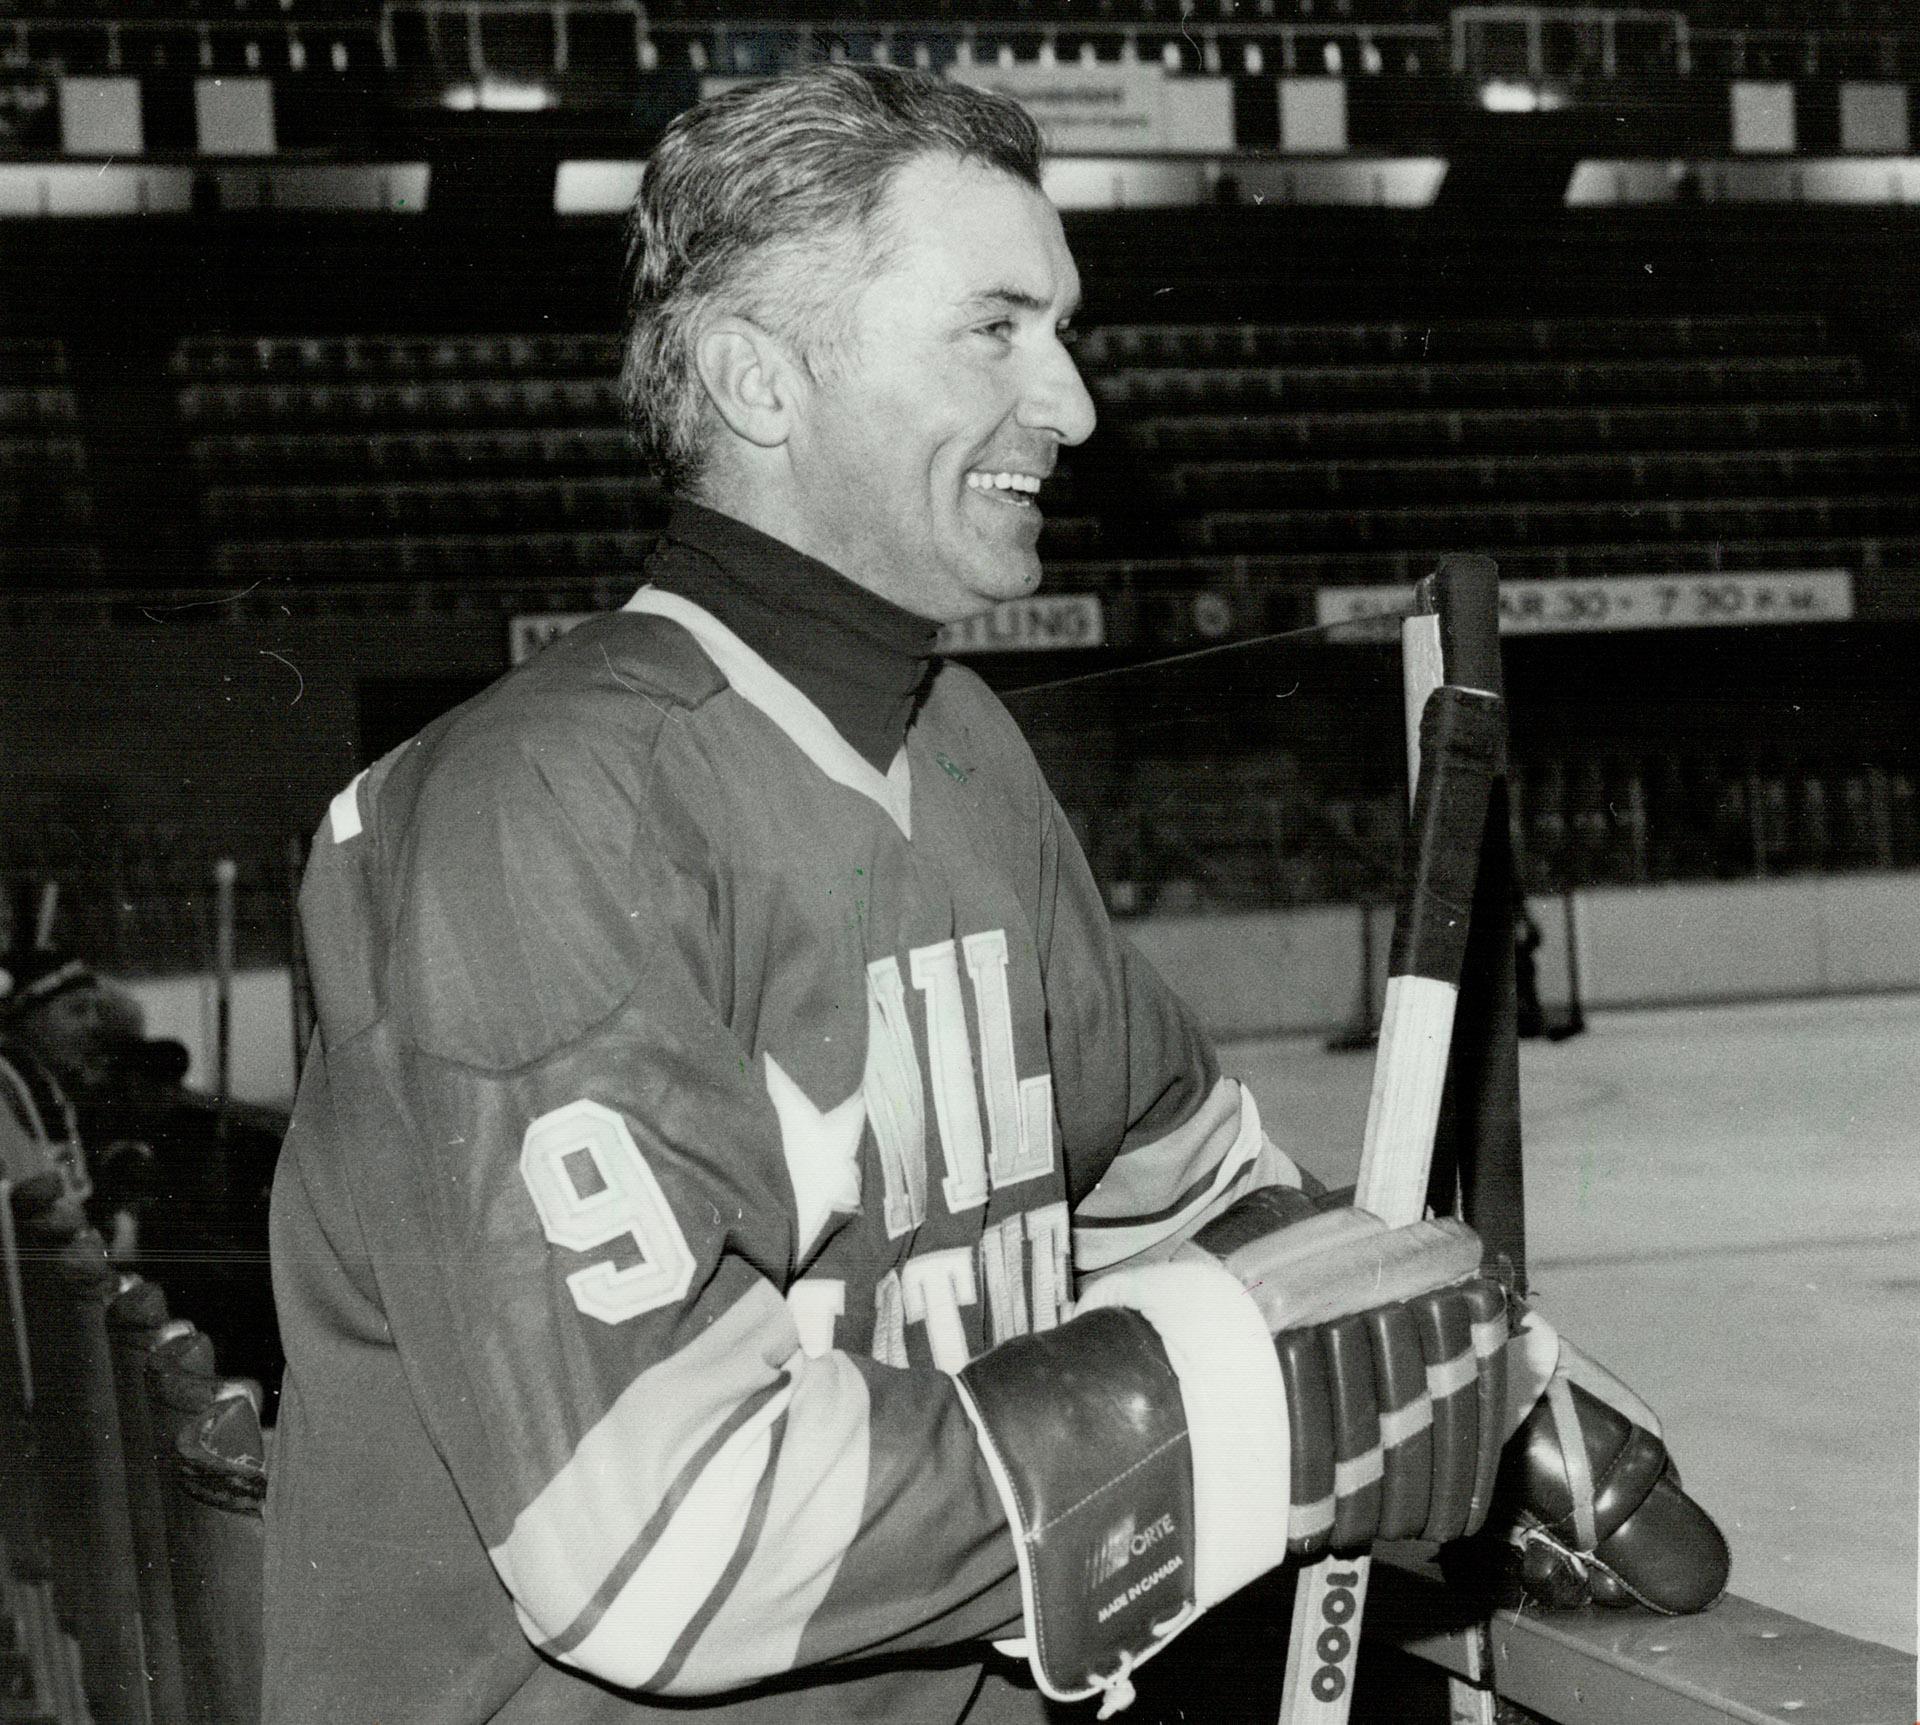 Former New York Ranger player Andy Bathgate speaks during a